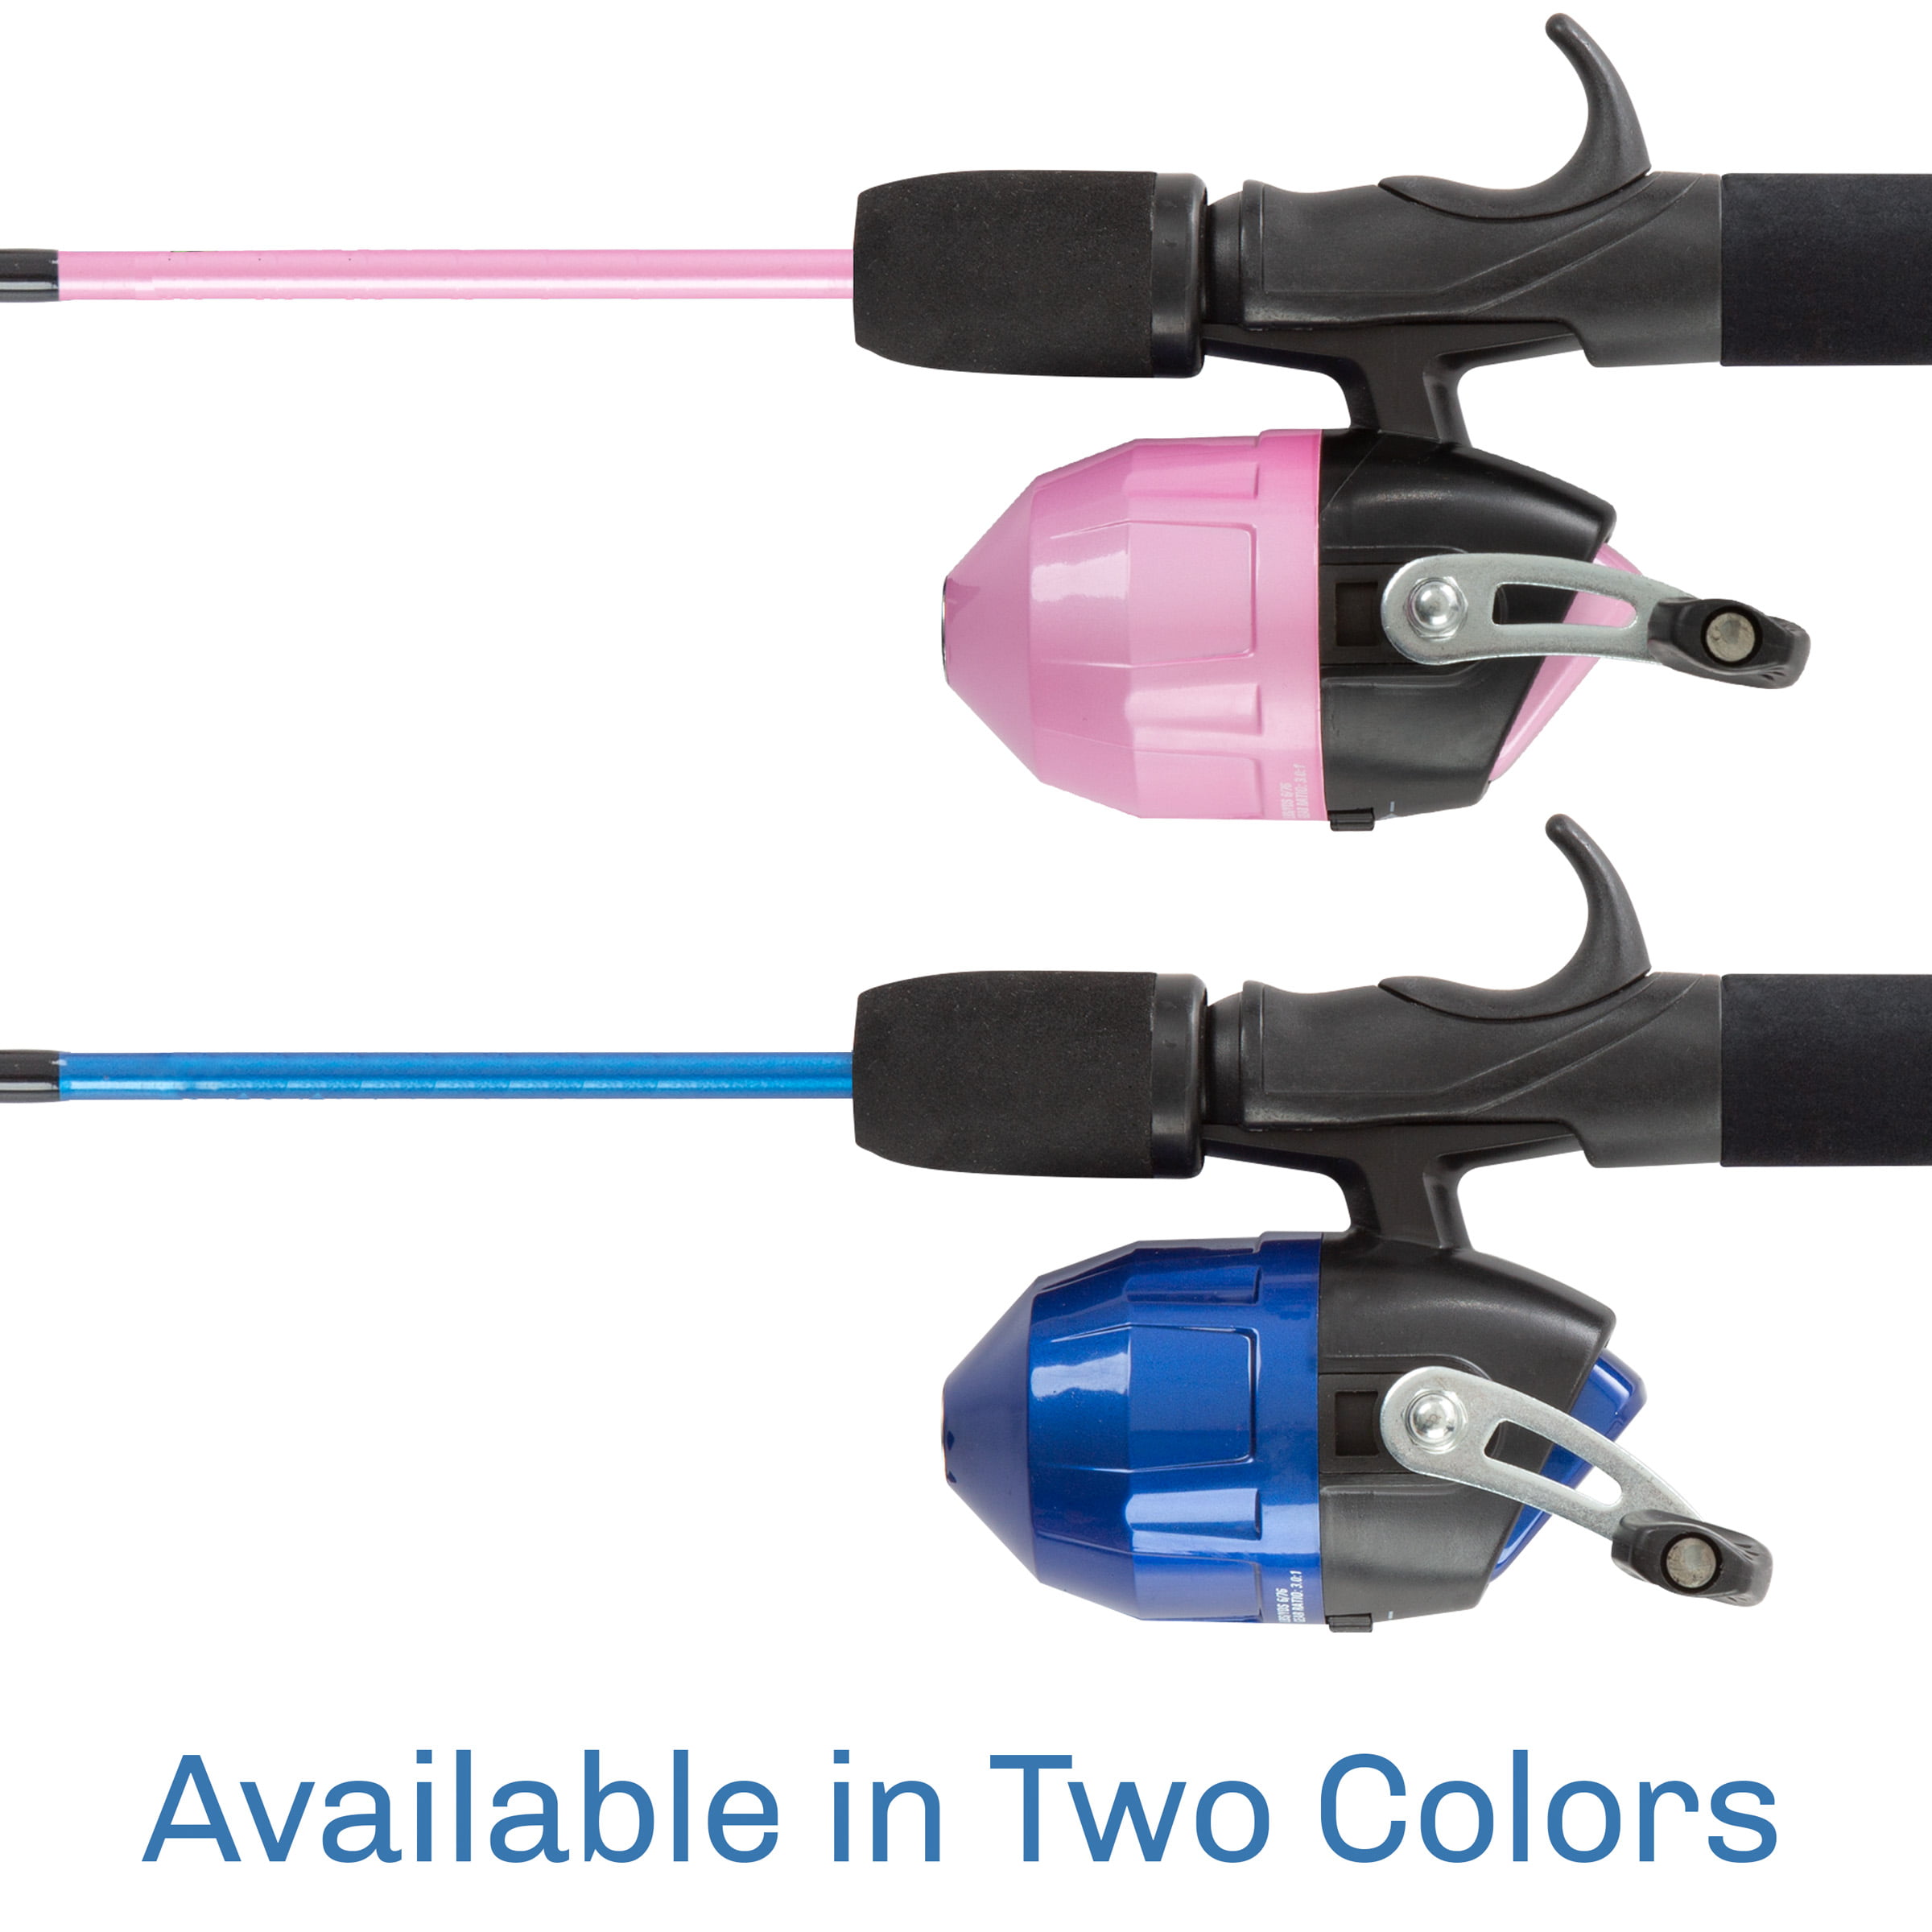 Kid Casters: Youth 29.5 Fishing Poles, Small & Easy to Use, Spincast Reel  w/ 3:1:1 Gear Ratio, (Pre-spooled w/ 6-Pound line, Incl. Casting Plug)